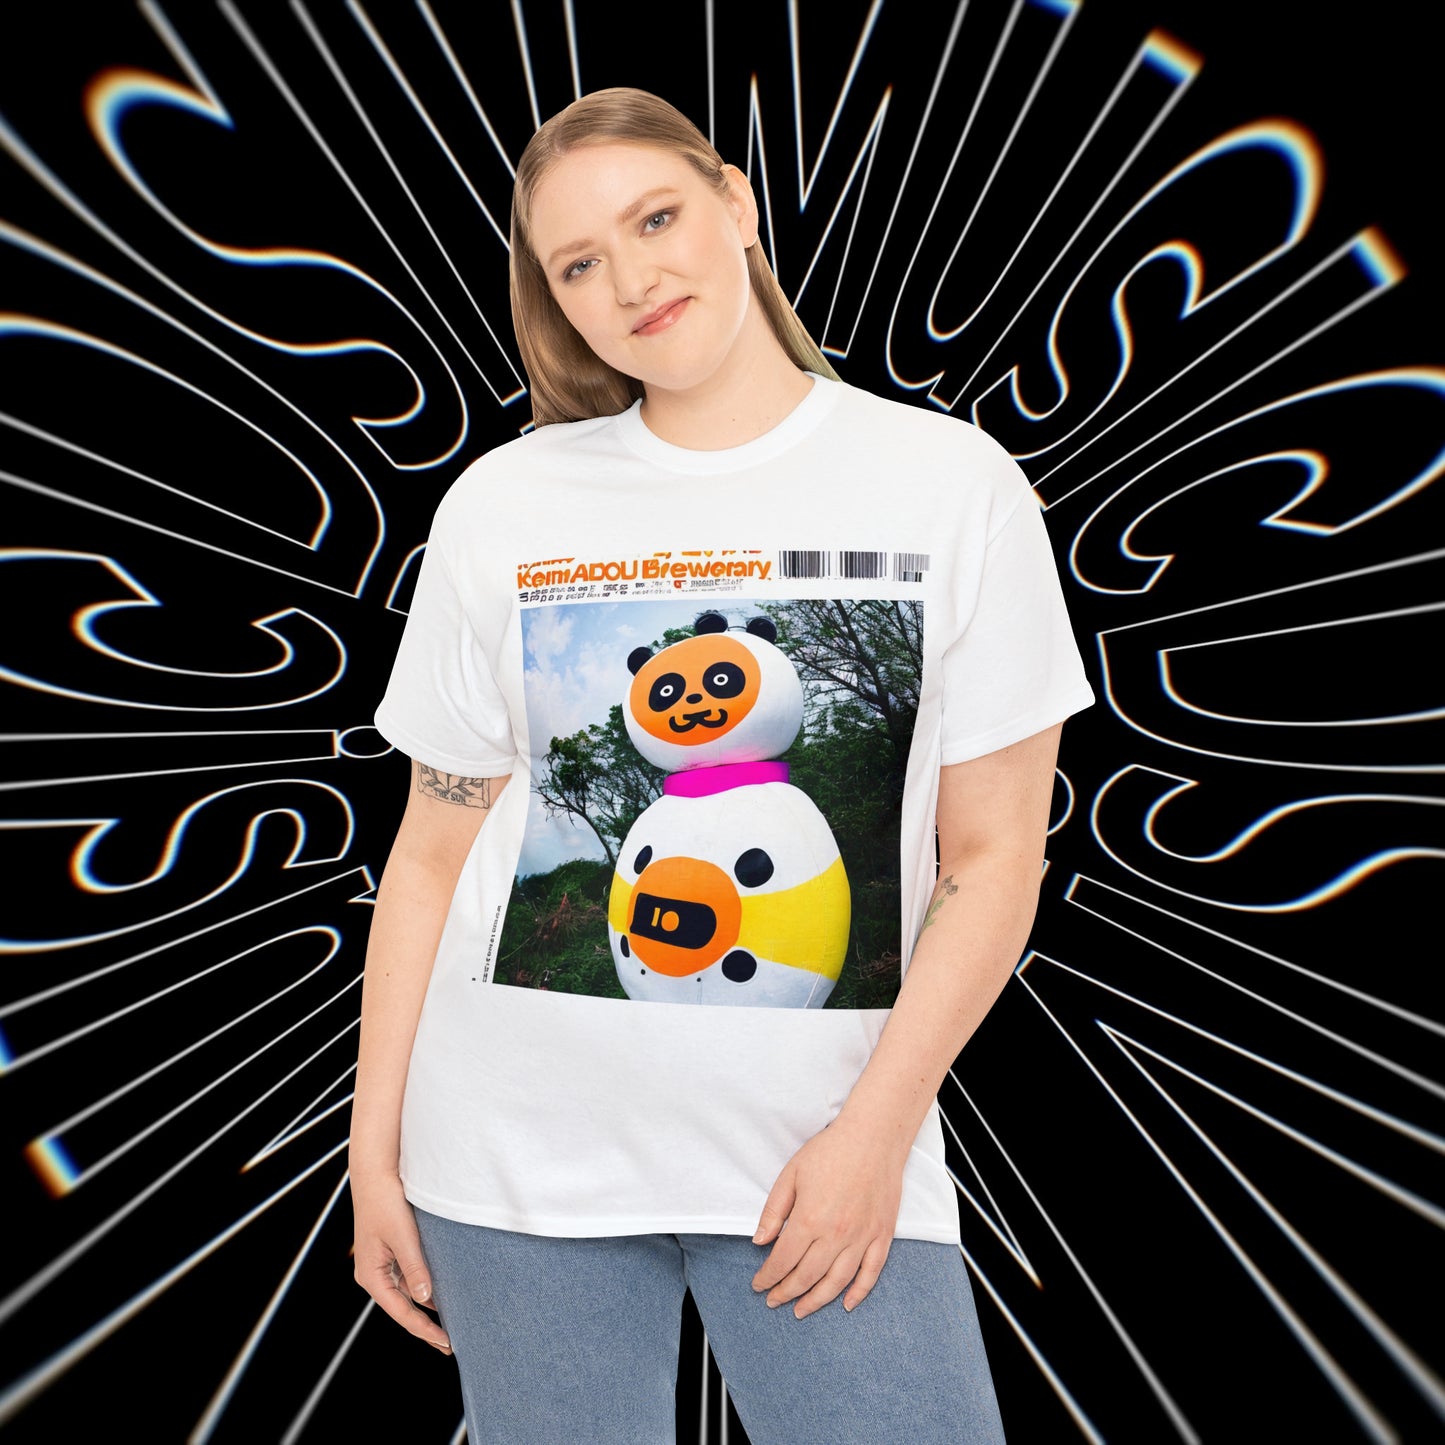 "Groove Panda" - DSIV Music "Cooked Beats #7" Limited Edition Tee